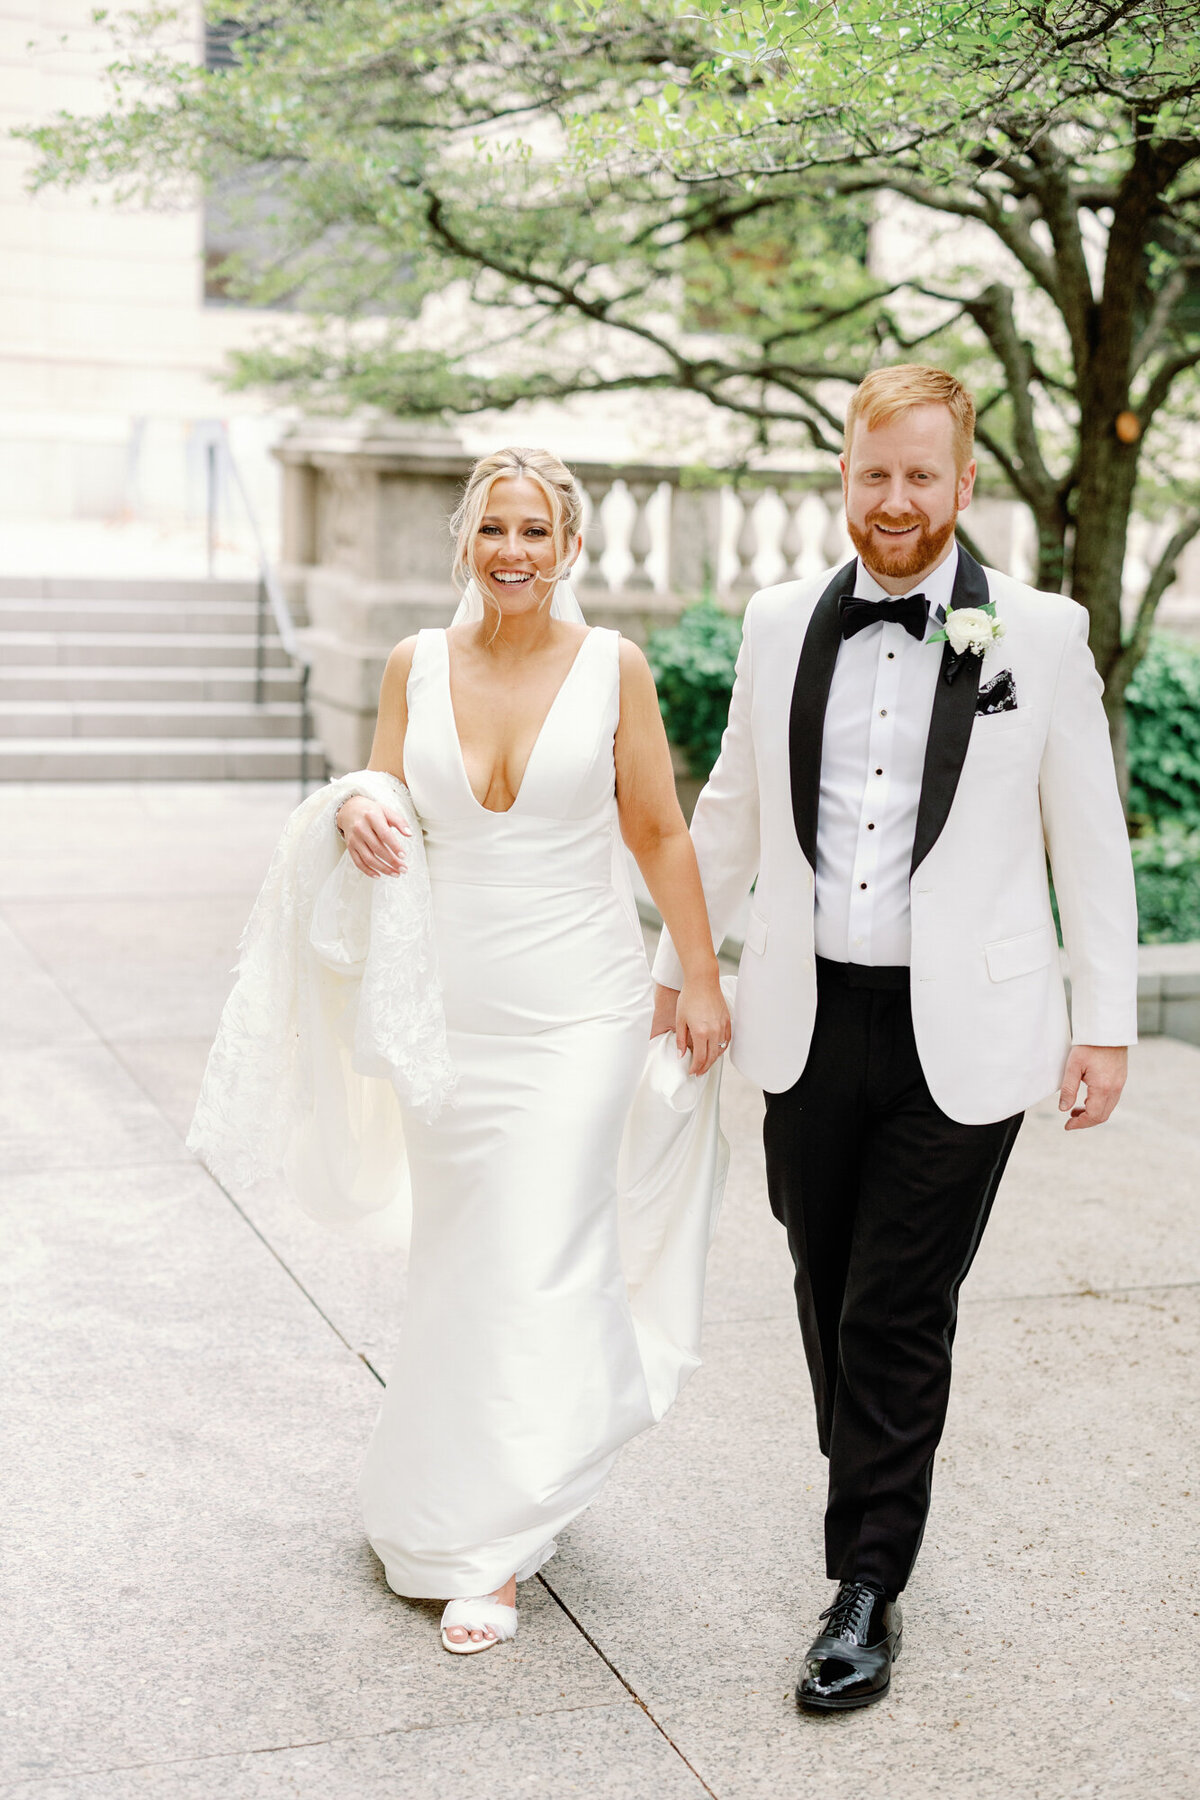 A candid wedding portrait of newlyweds walking through the South Garden of the Art Institute of Chicago